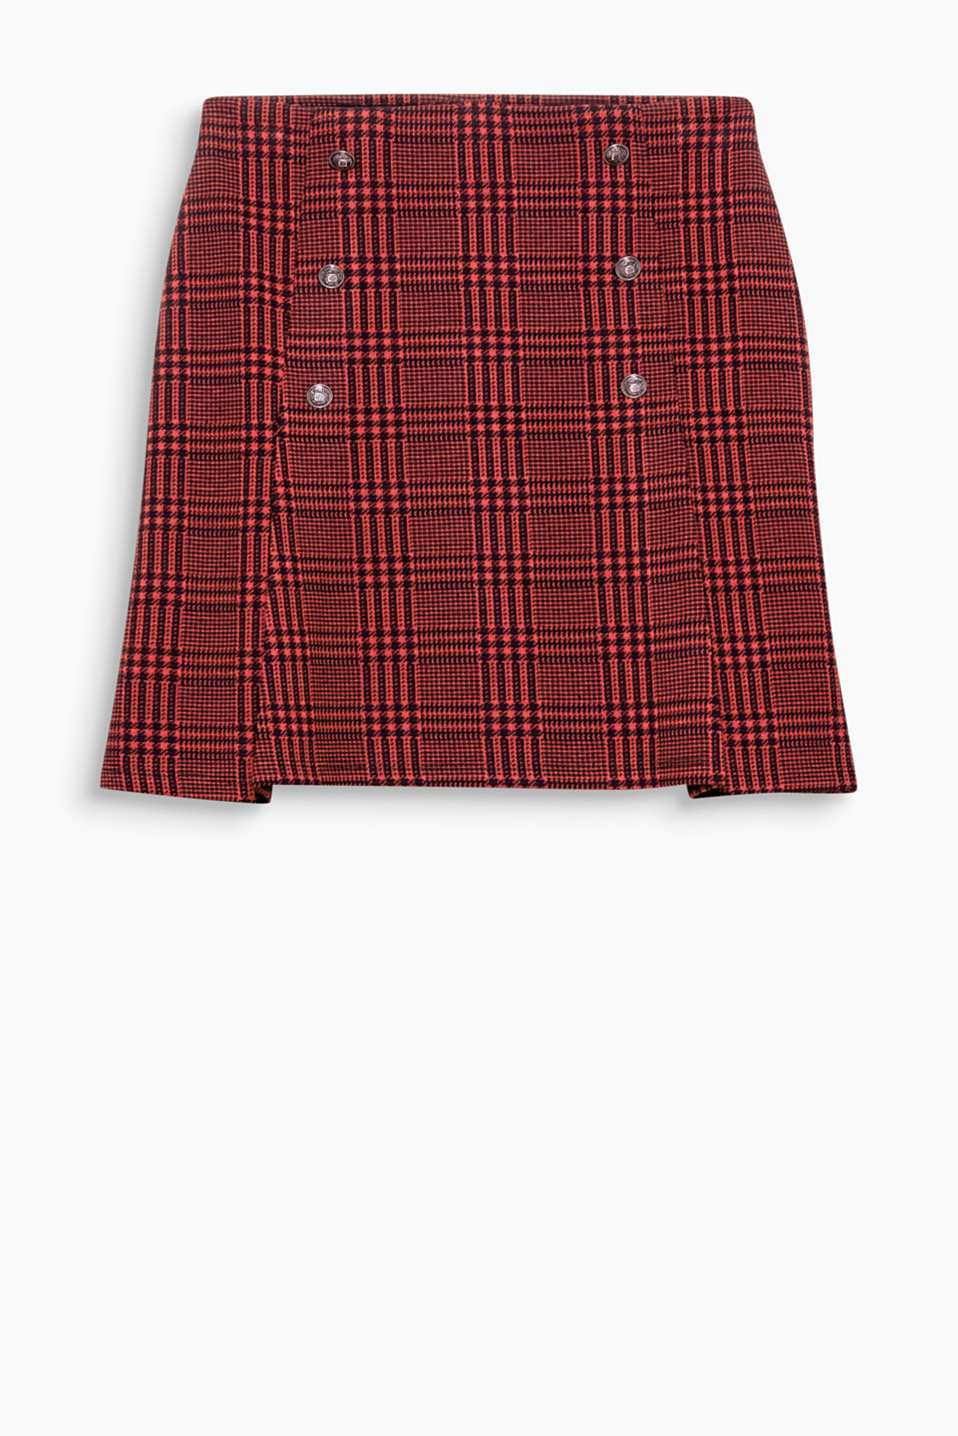 Esprit - Jersey stretch skirt with checks and pleats at our Online Shop